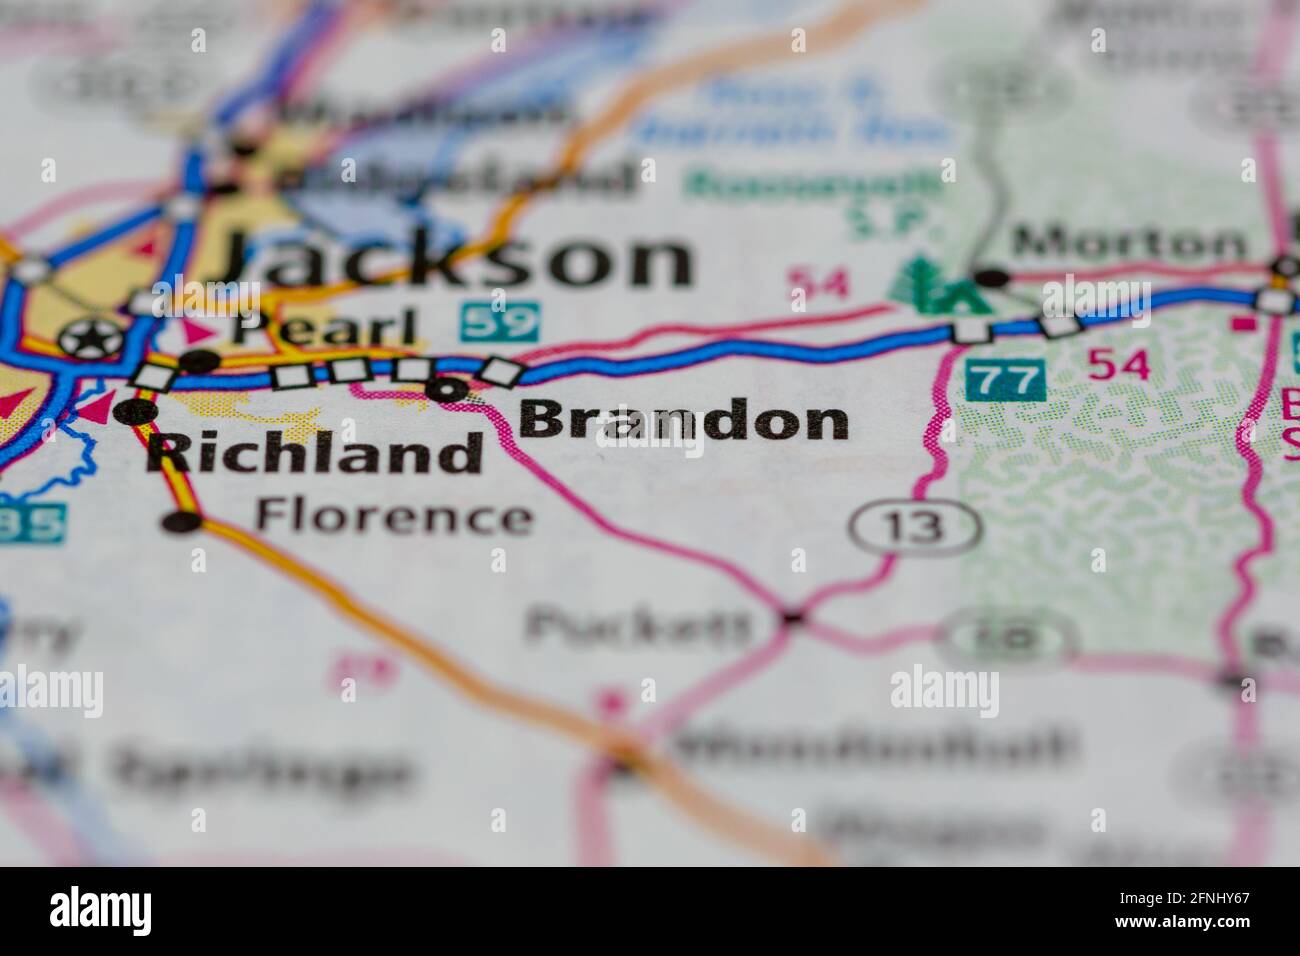 Brandon Mississippi USA shown on a Geography map or road map Stock Photo